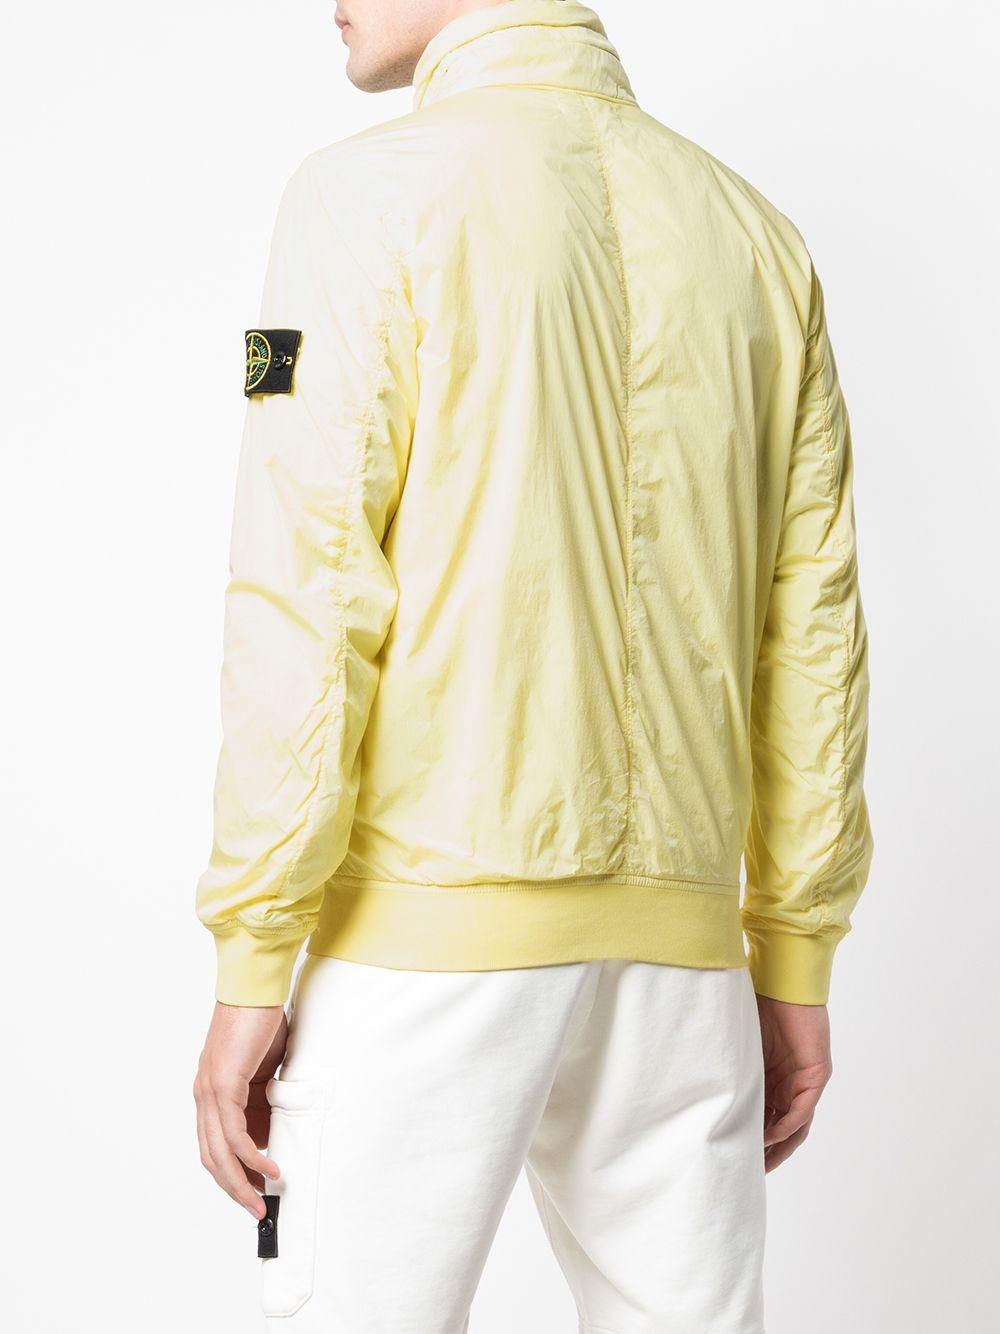 Stone Island Synthetic Lightweight Zip-up Jacket in Yellow for Men - Lyst